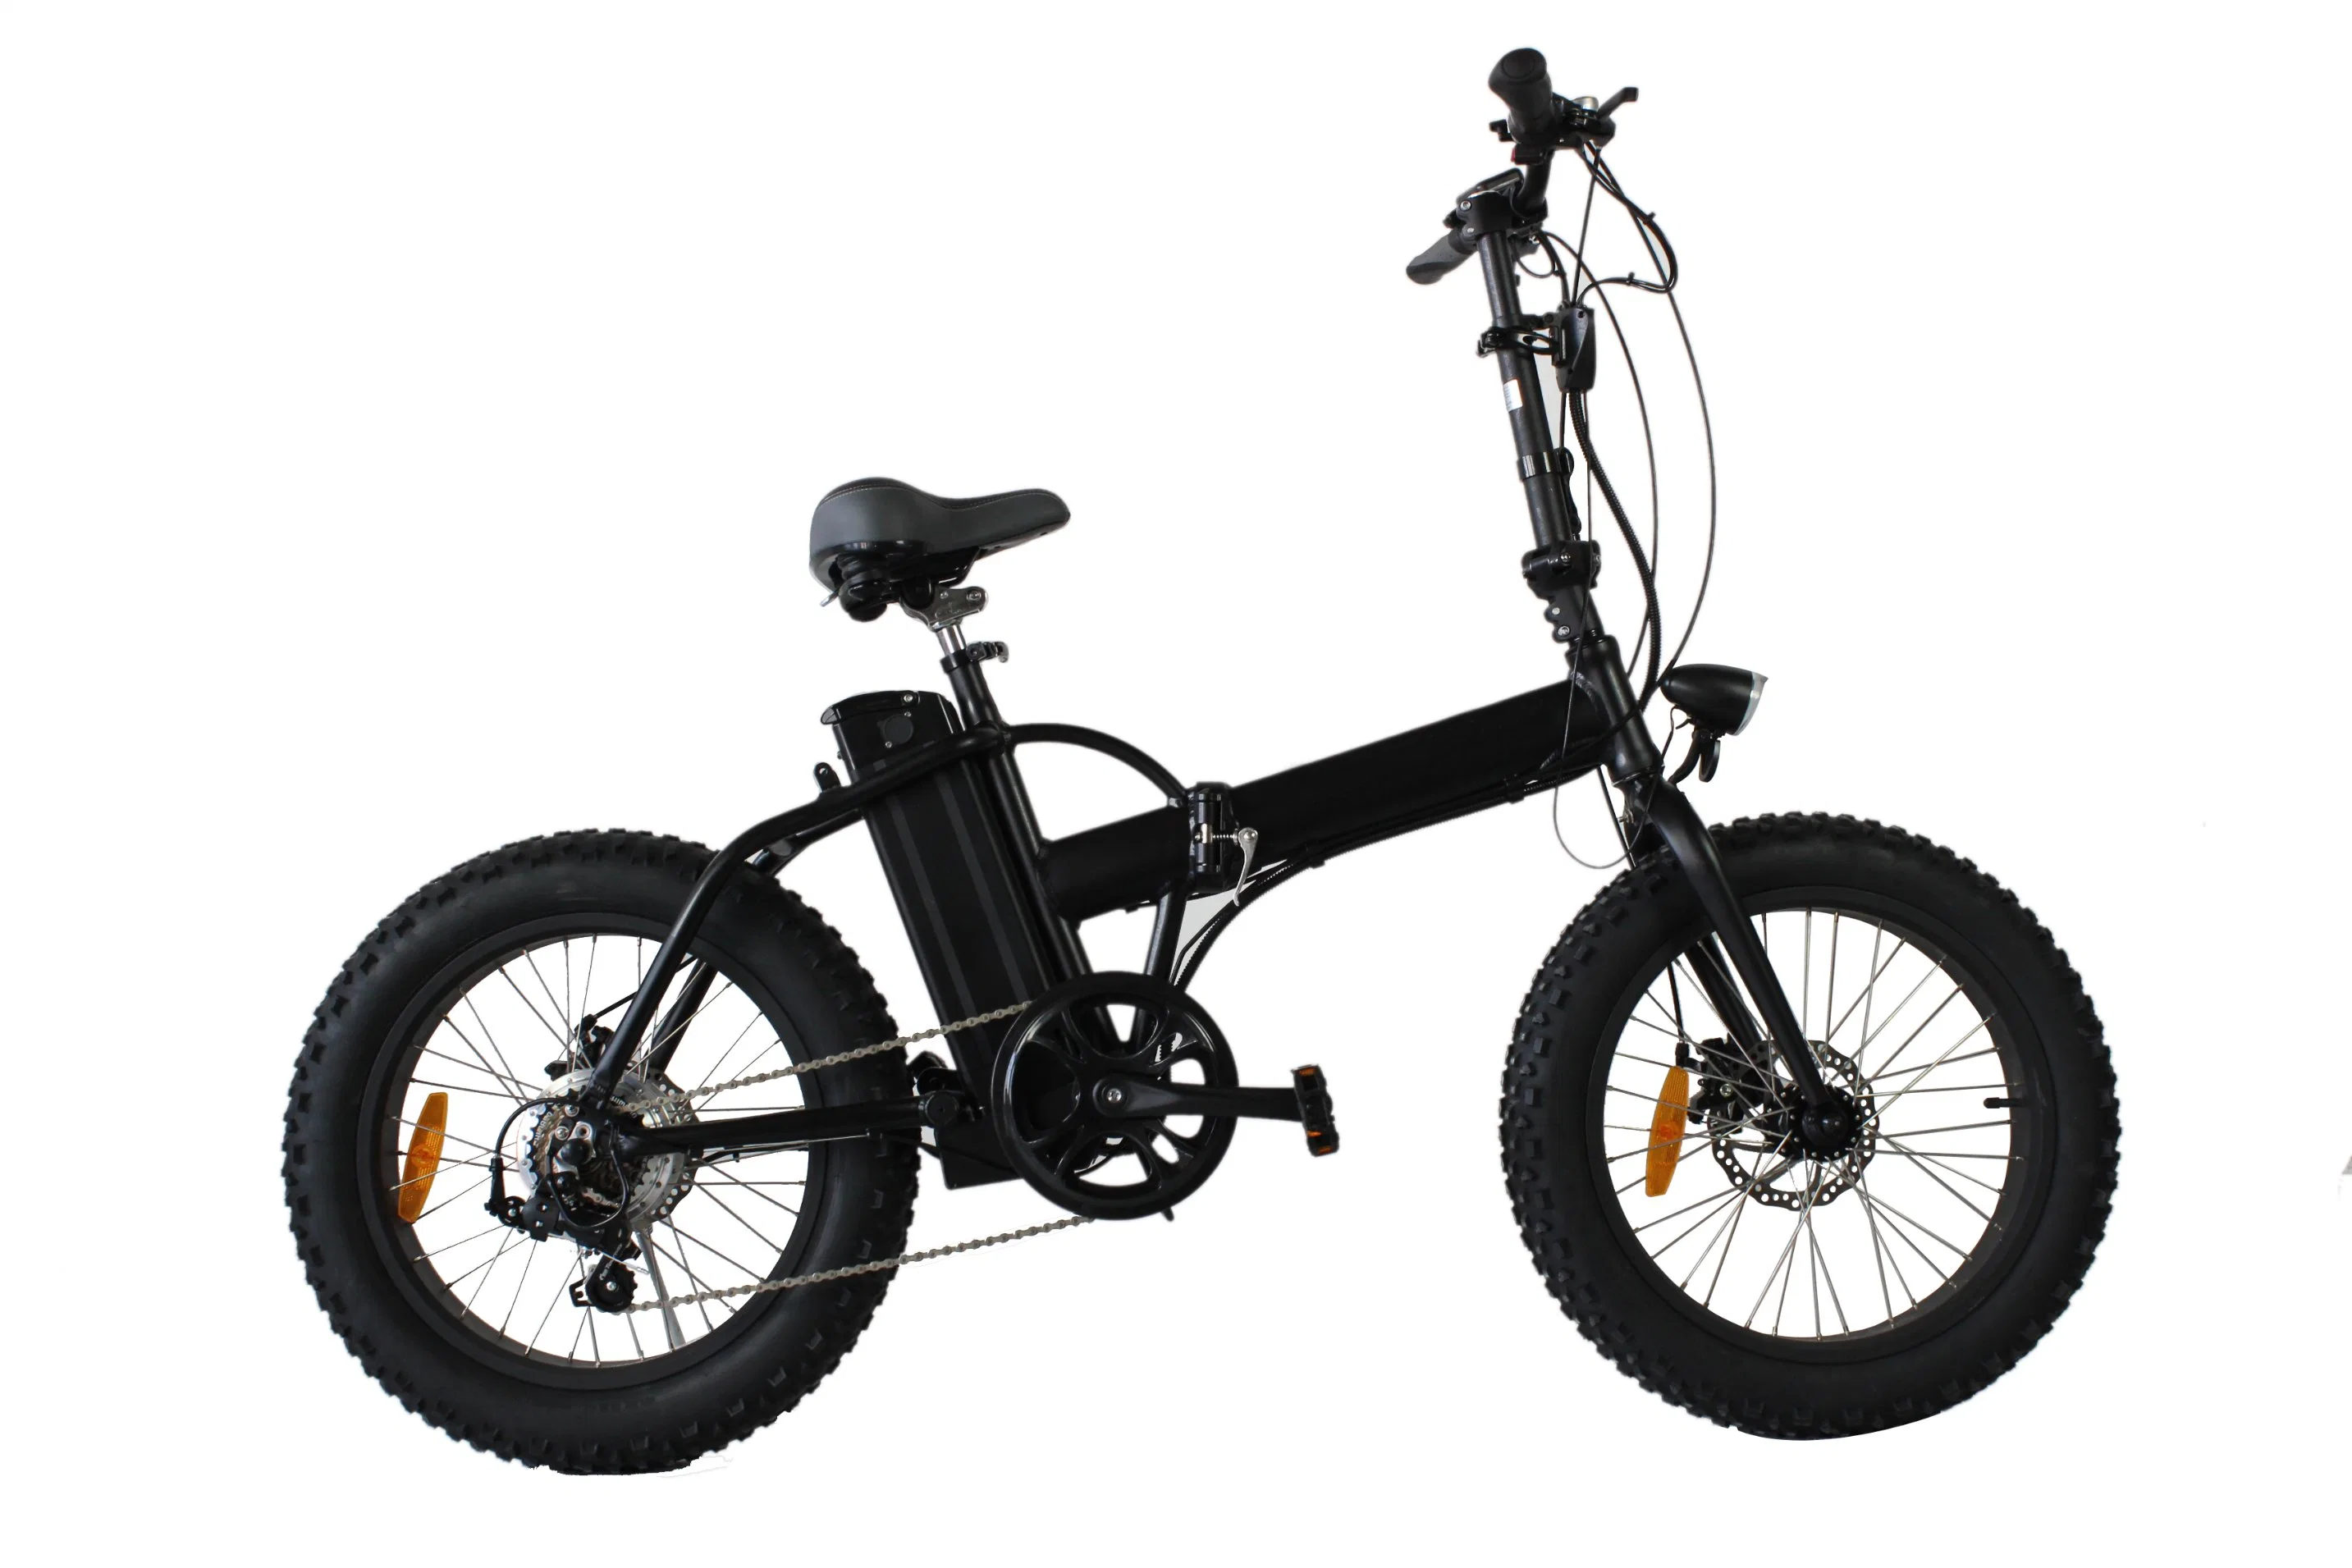 36V/10.4ah Samsung Lithium Battery 350W 6/7 Speed Fashion Motorized Bicycle Electric Bike